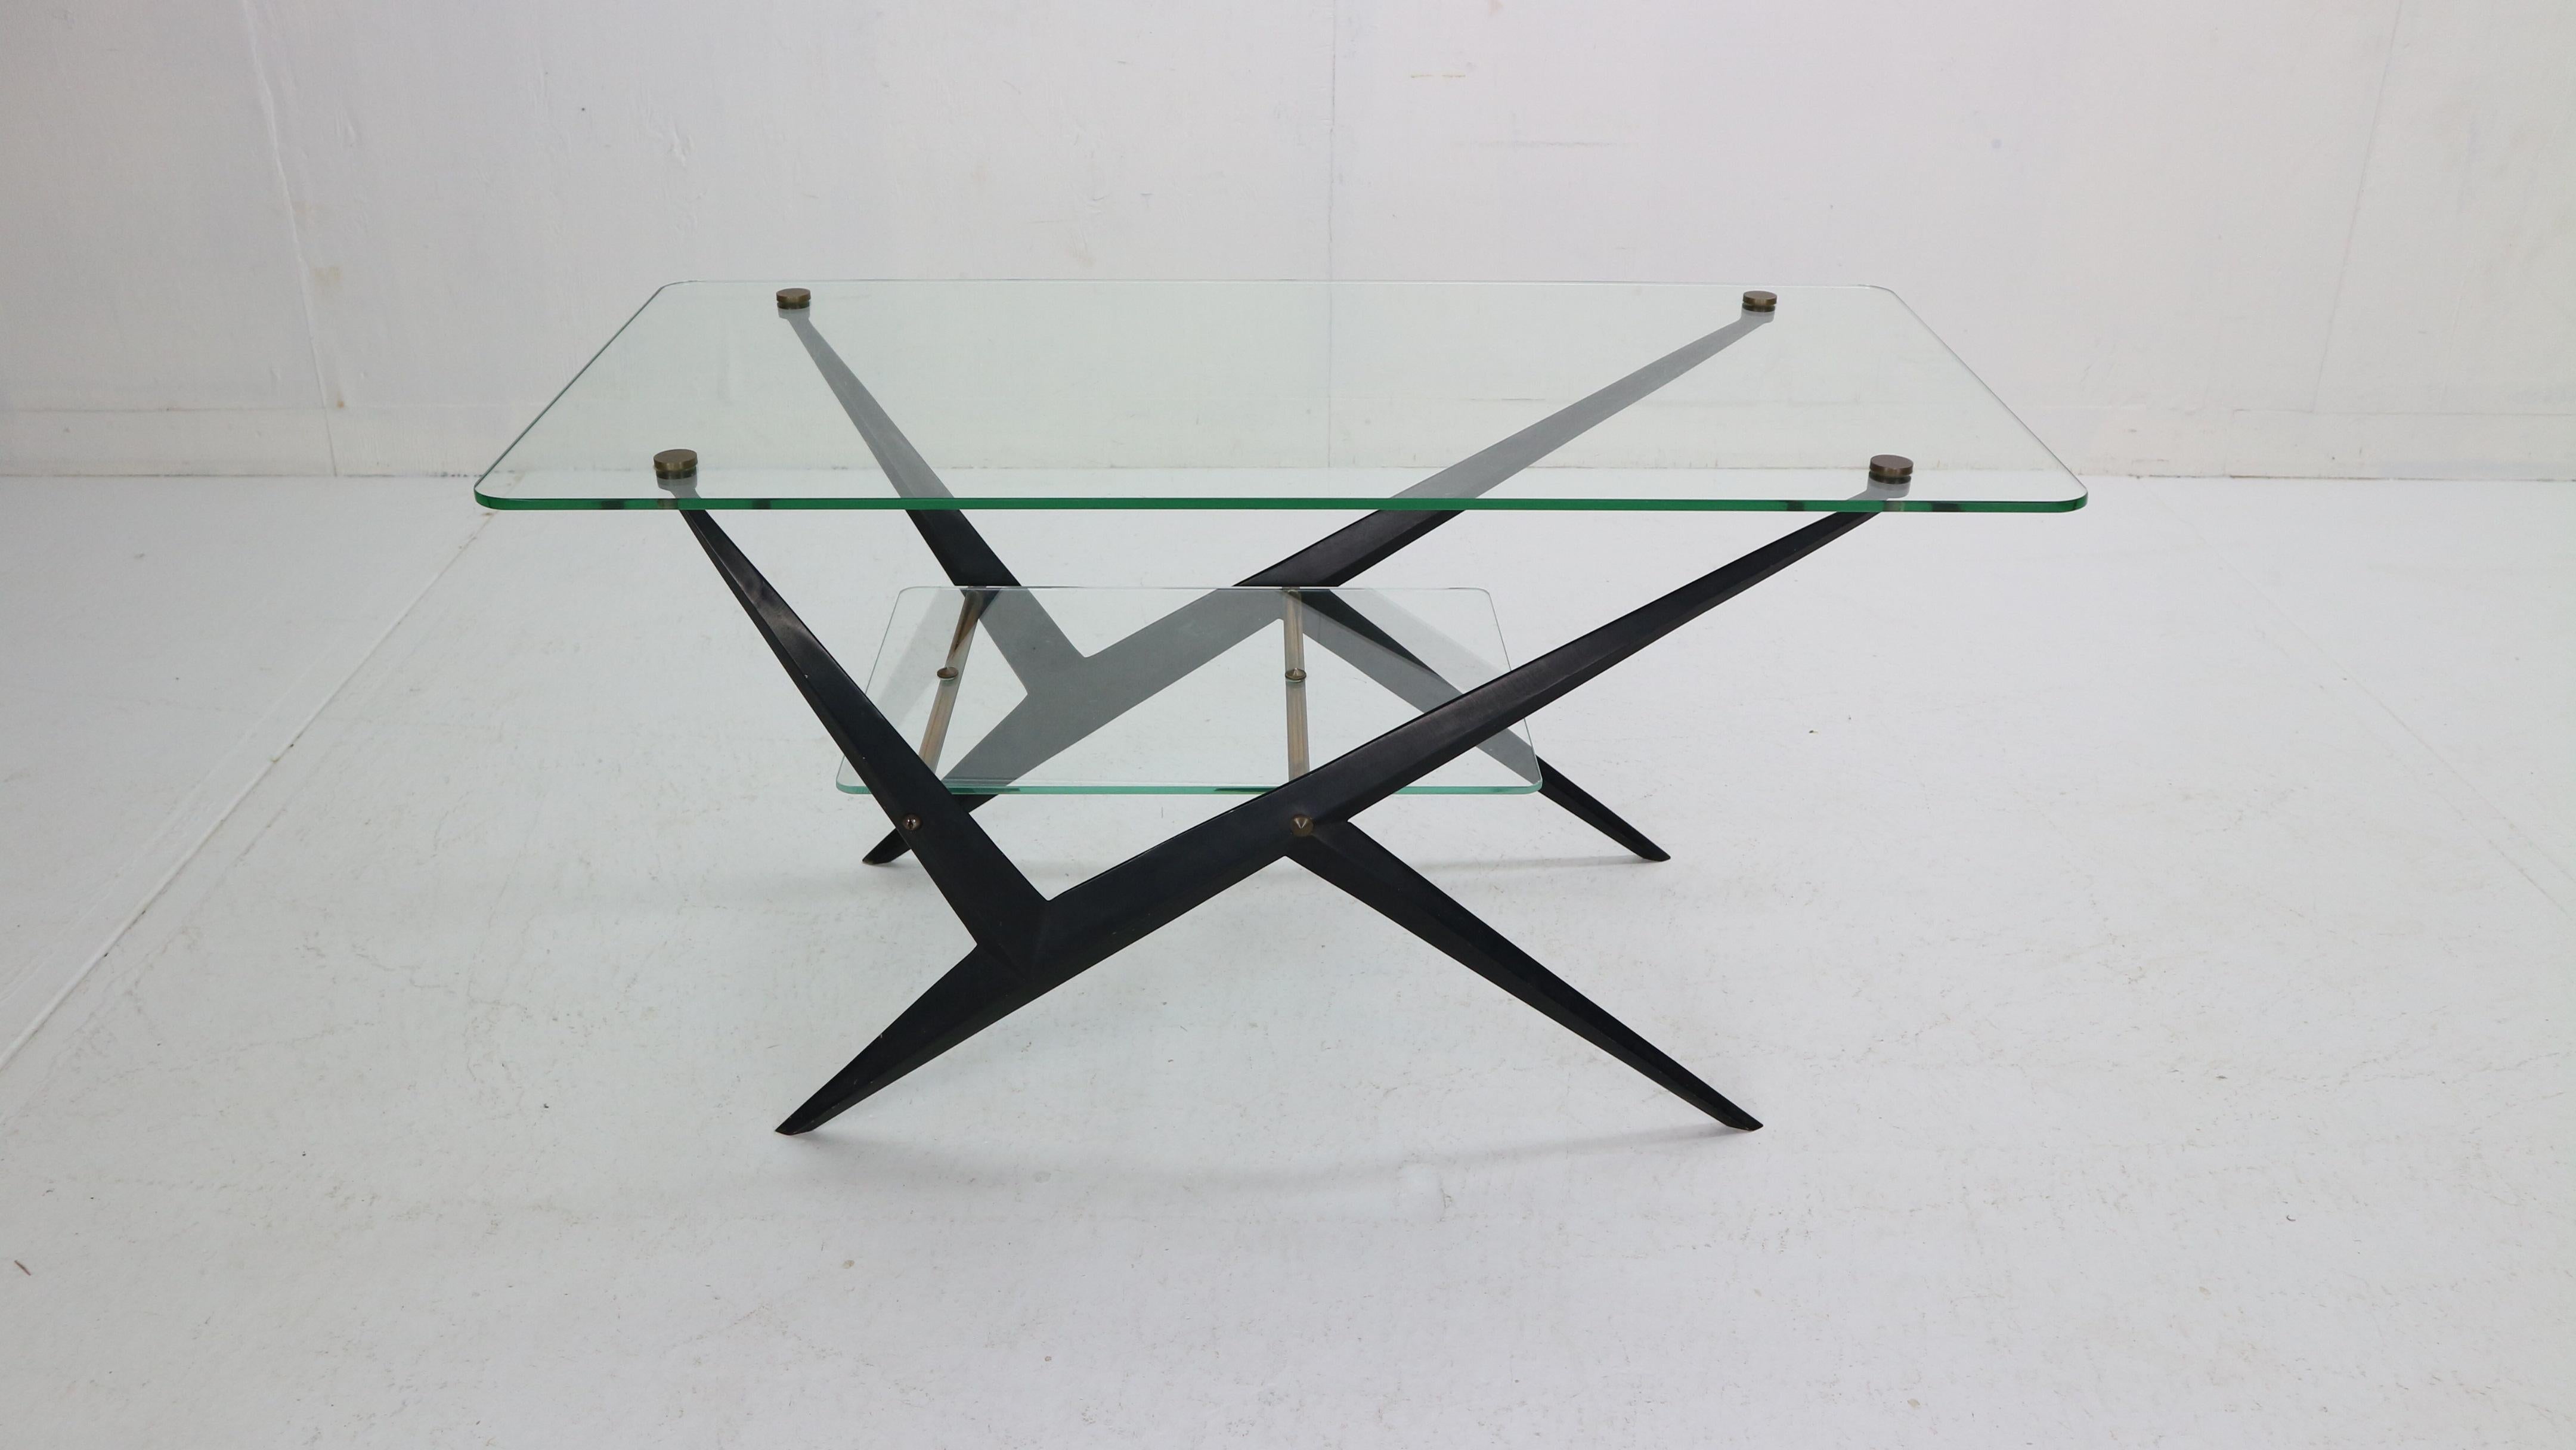 Mid-Century Modern dynamic coffee or cocktail designed and made by Angelo Ostuni, Italy, 1950s period. This table has a black lacquered metal frame and the brass details attach the glass tops between and on the base.

The top glass shelve has been